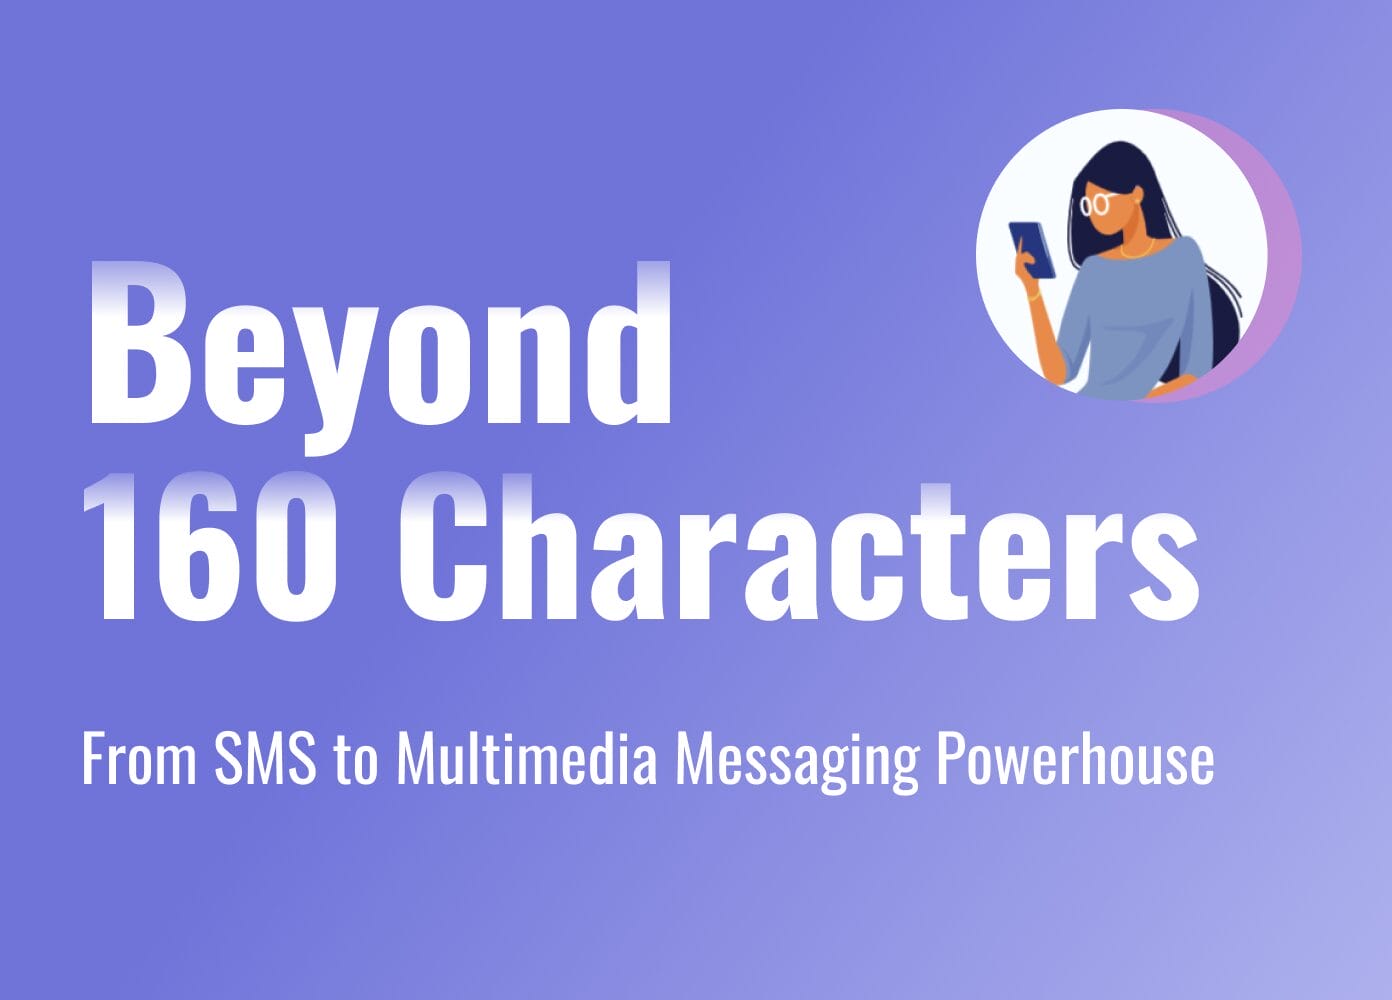 Beyond 160 Characters: From SMS to Multimedia Messaging Powerhouse